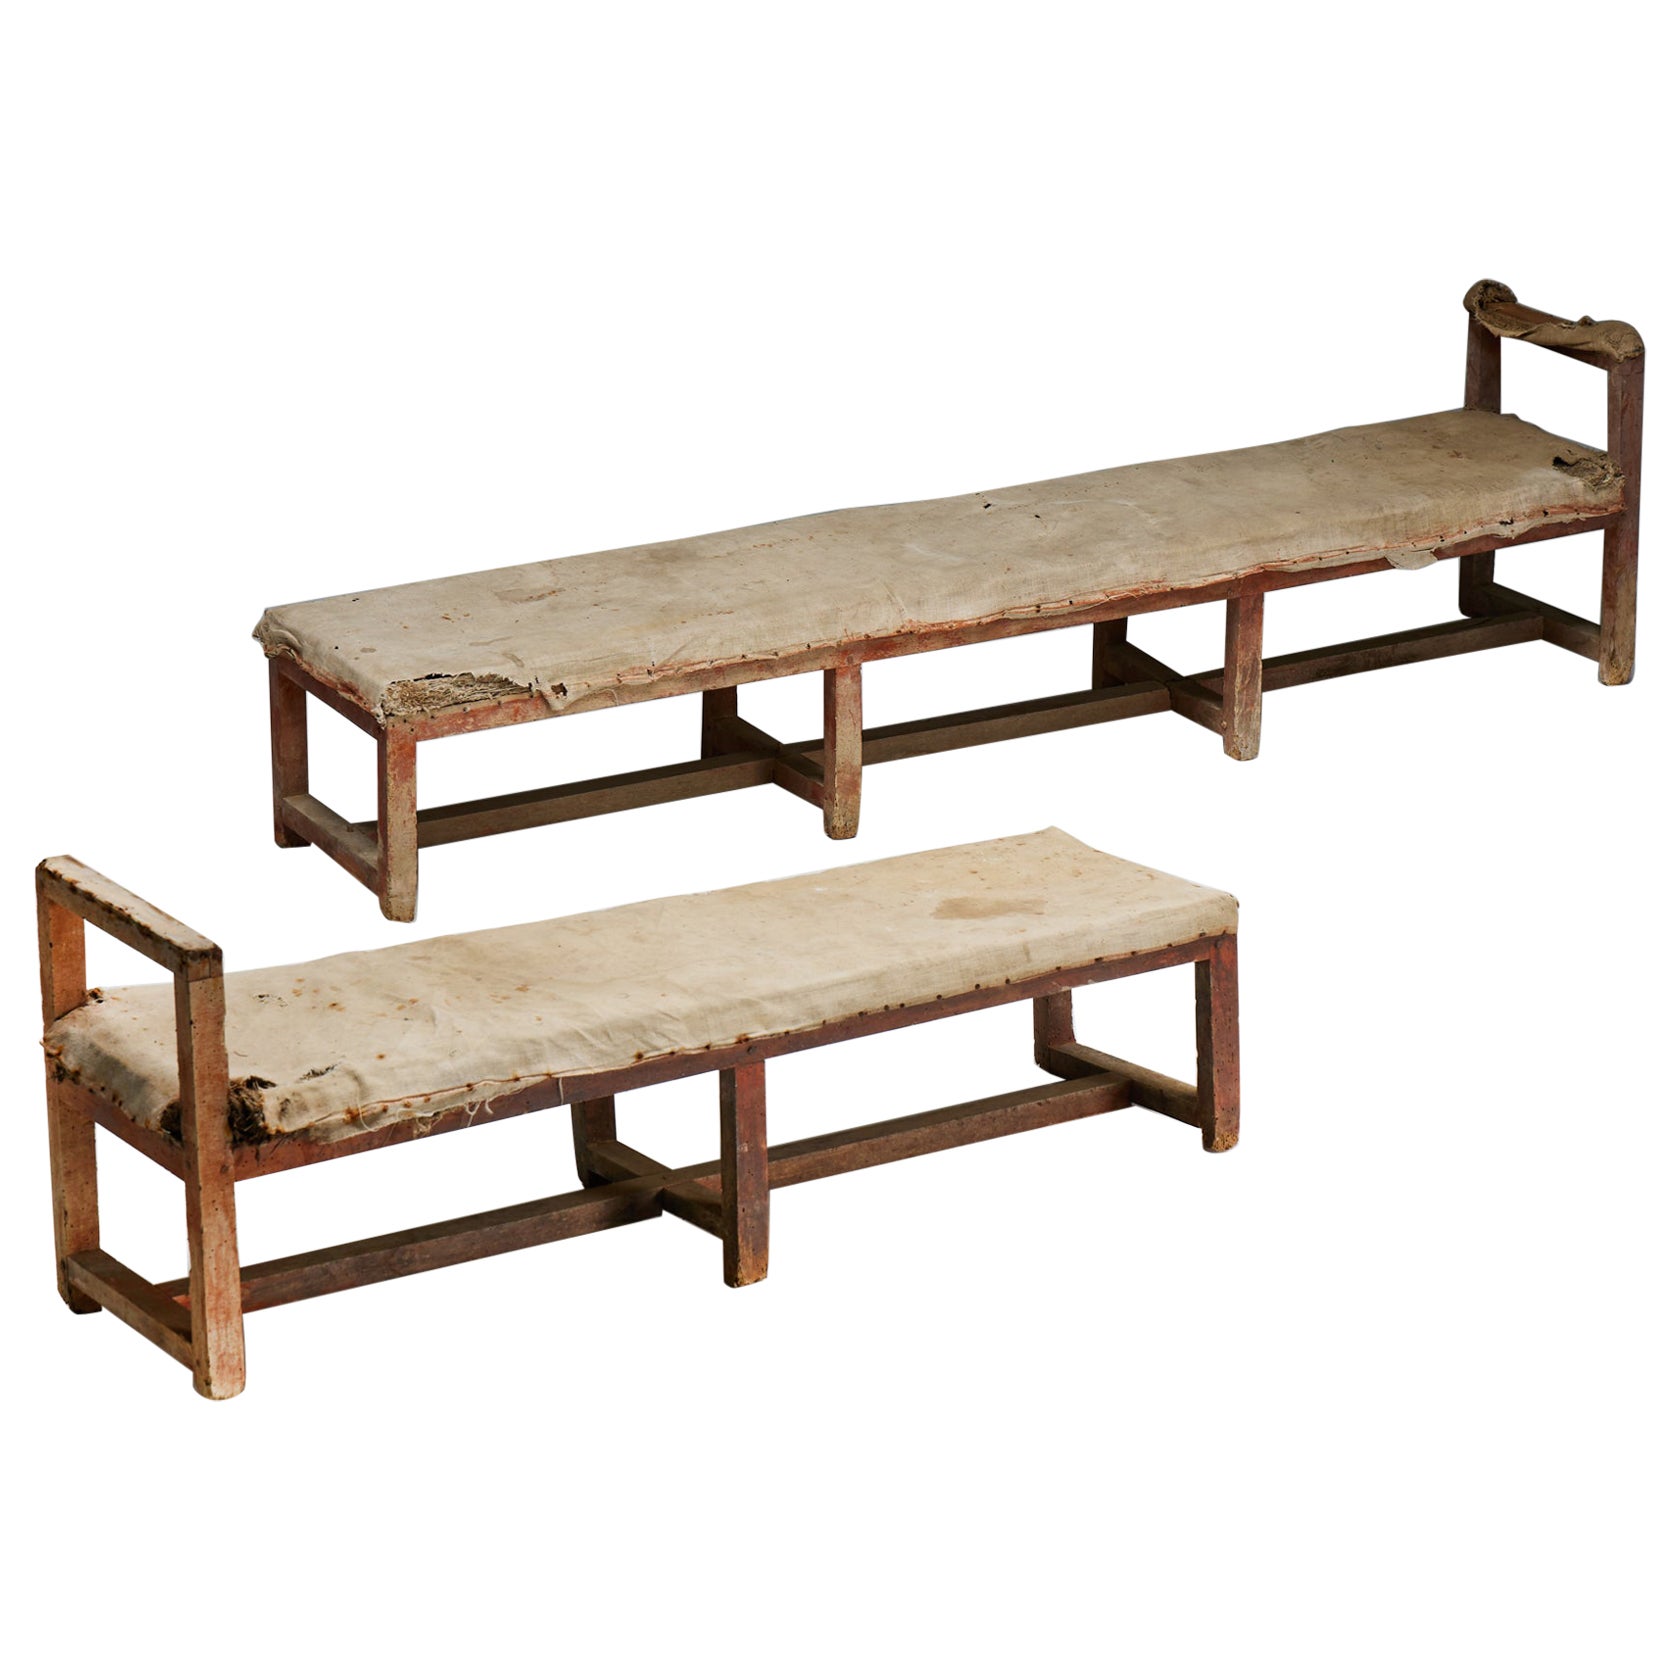 Pair of Rustic Travail Populaire Benches, France, 19th Century For Sale